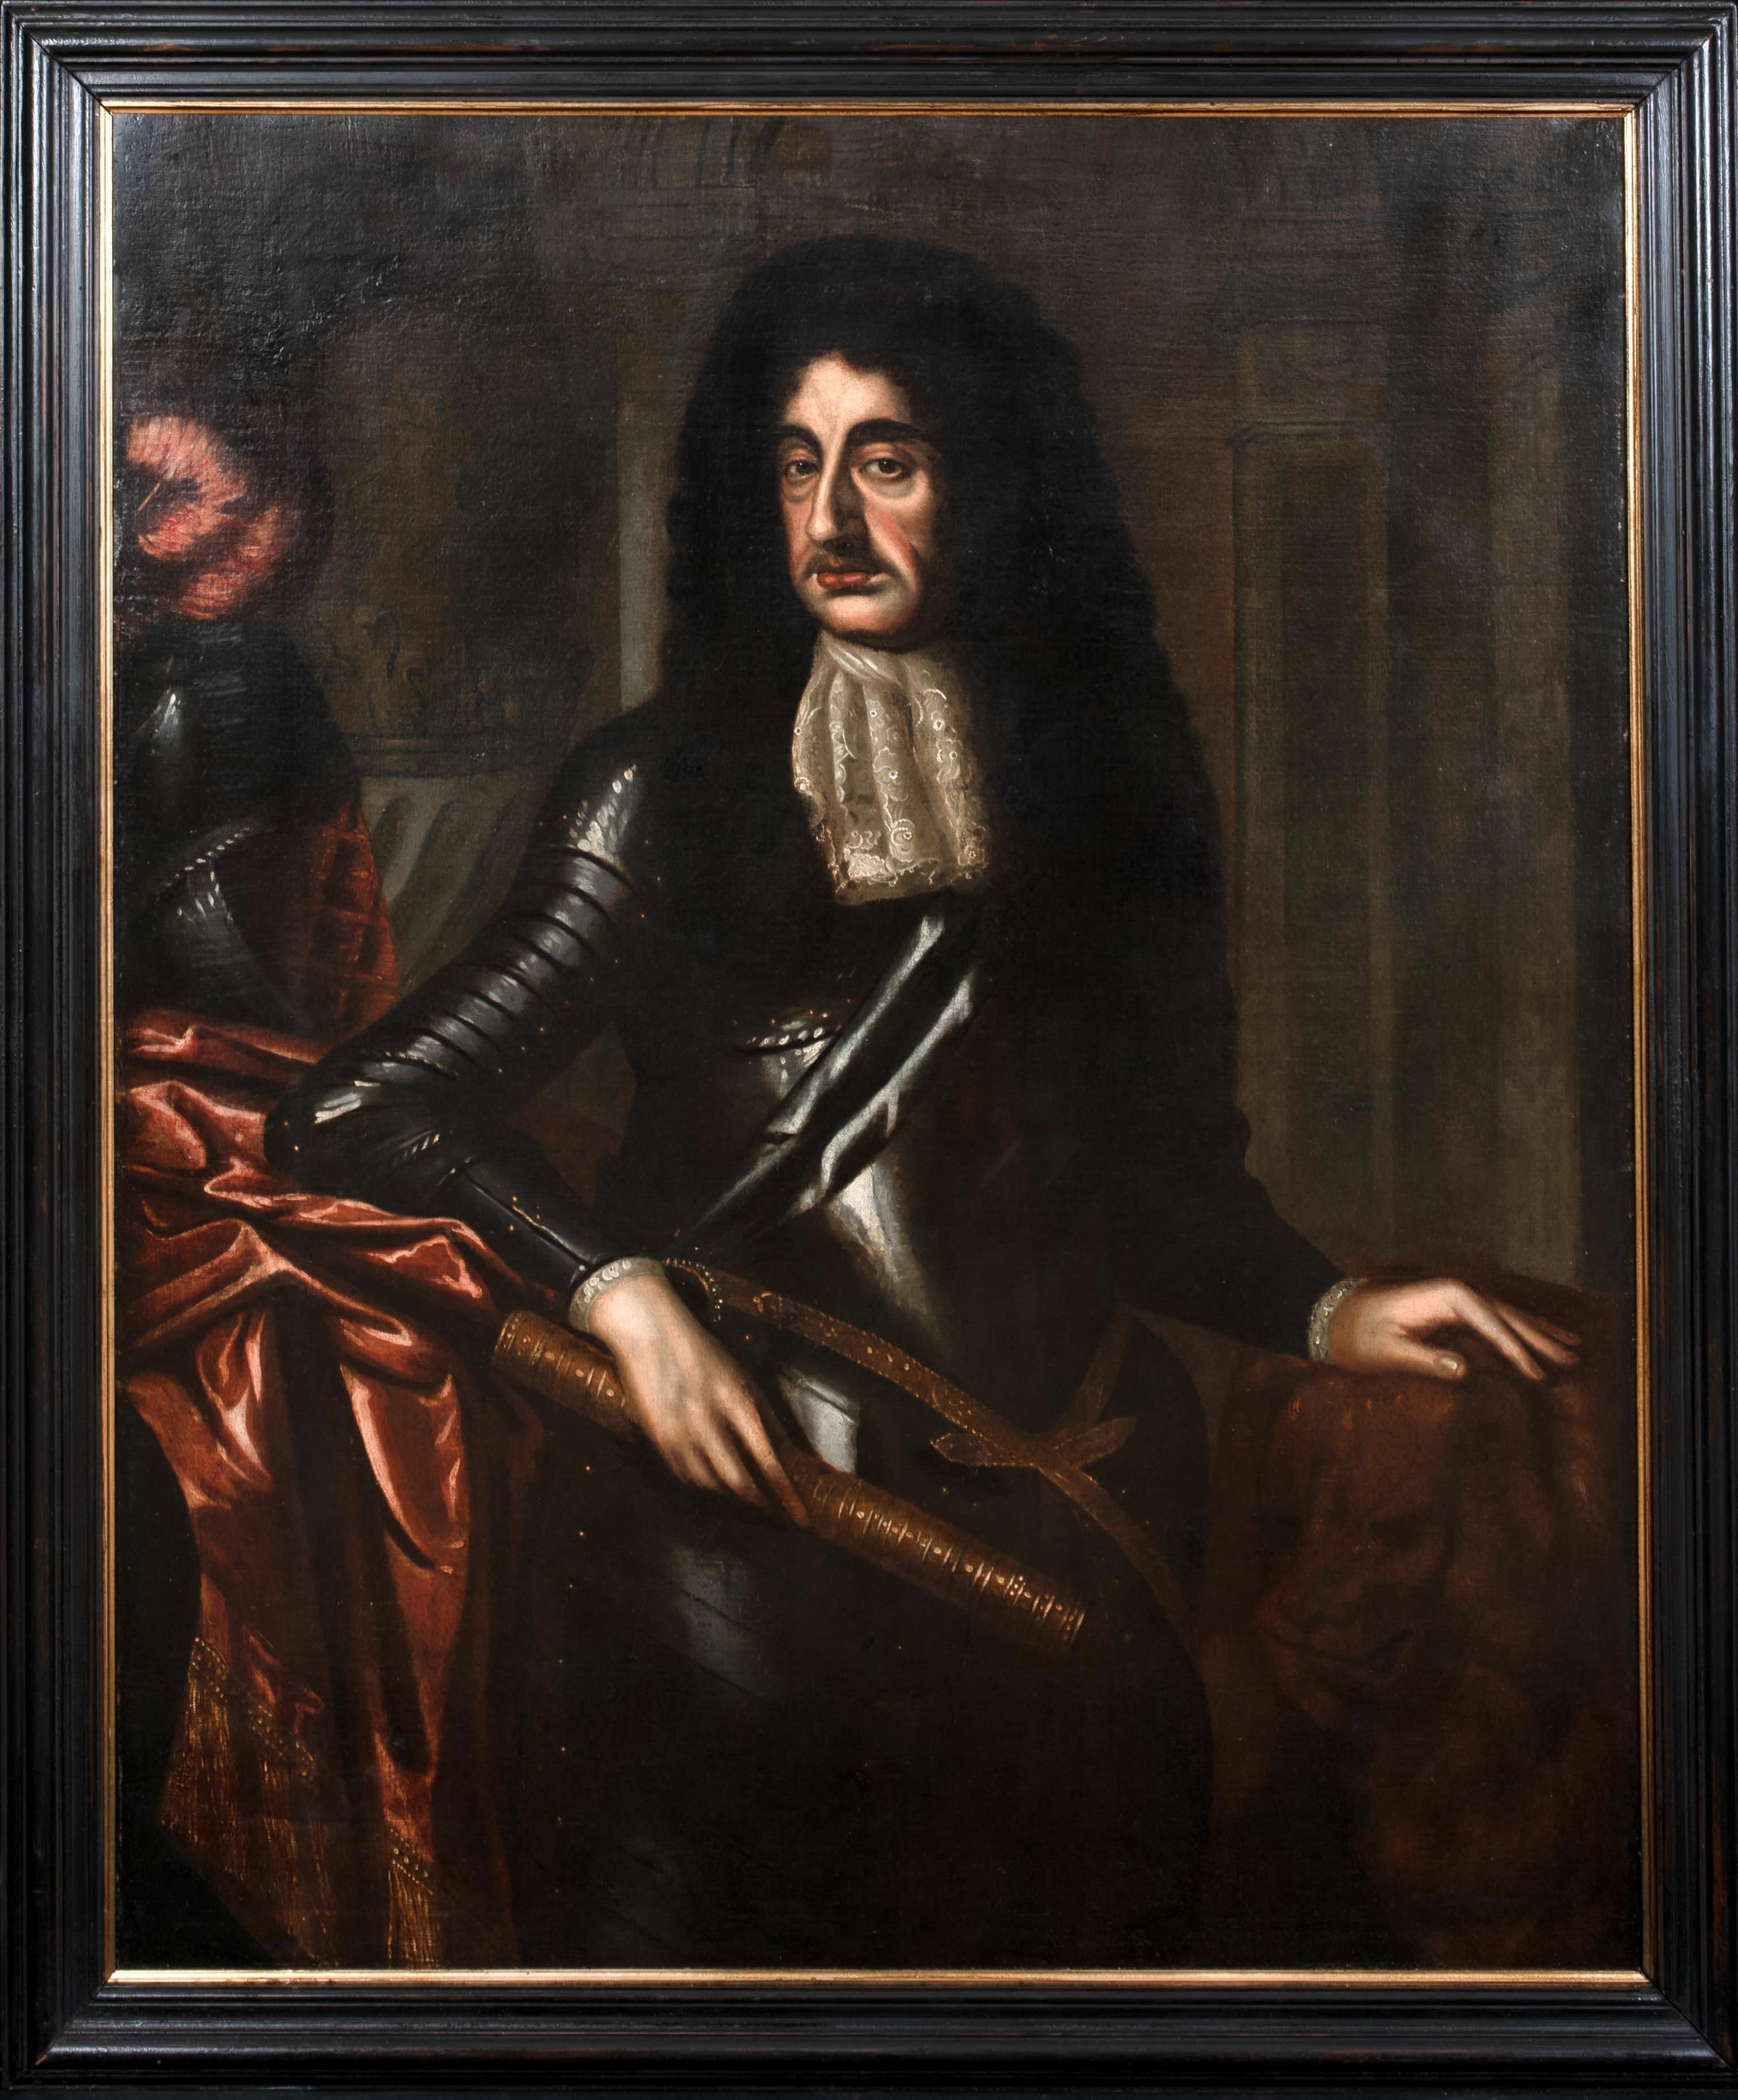 Unknown Portrait Painting - Portrait Of King Charles II Of England (1630-1685), 17th Century   